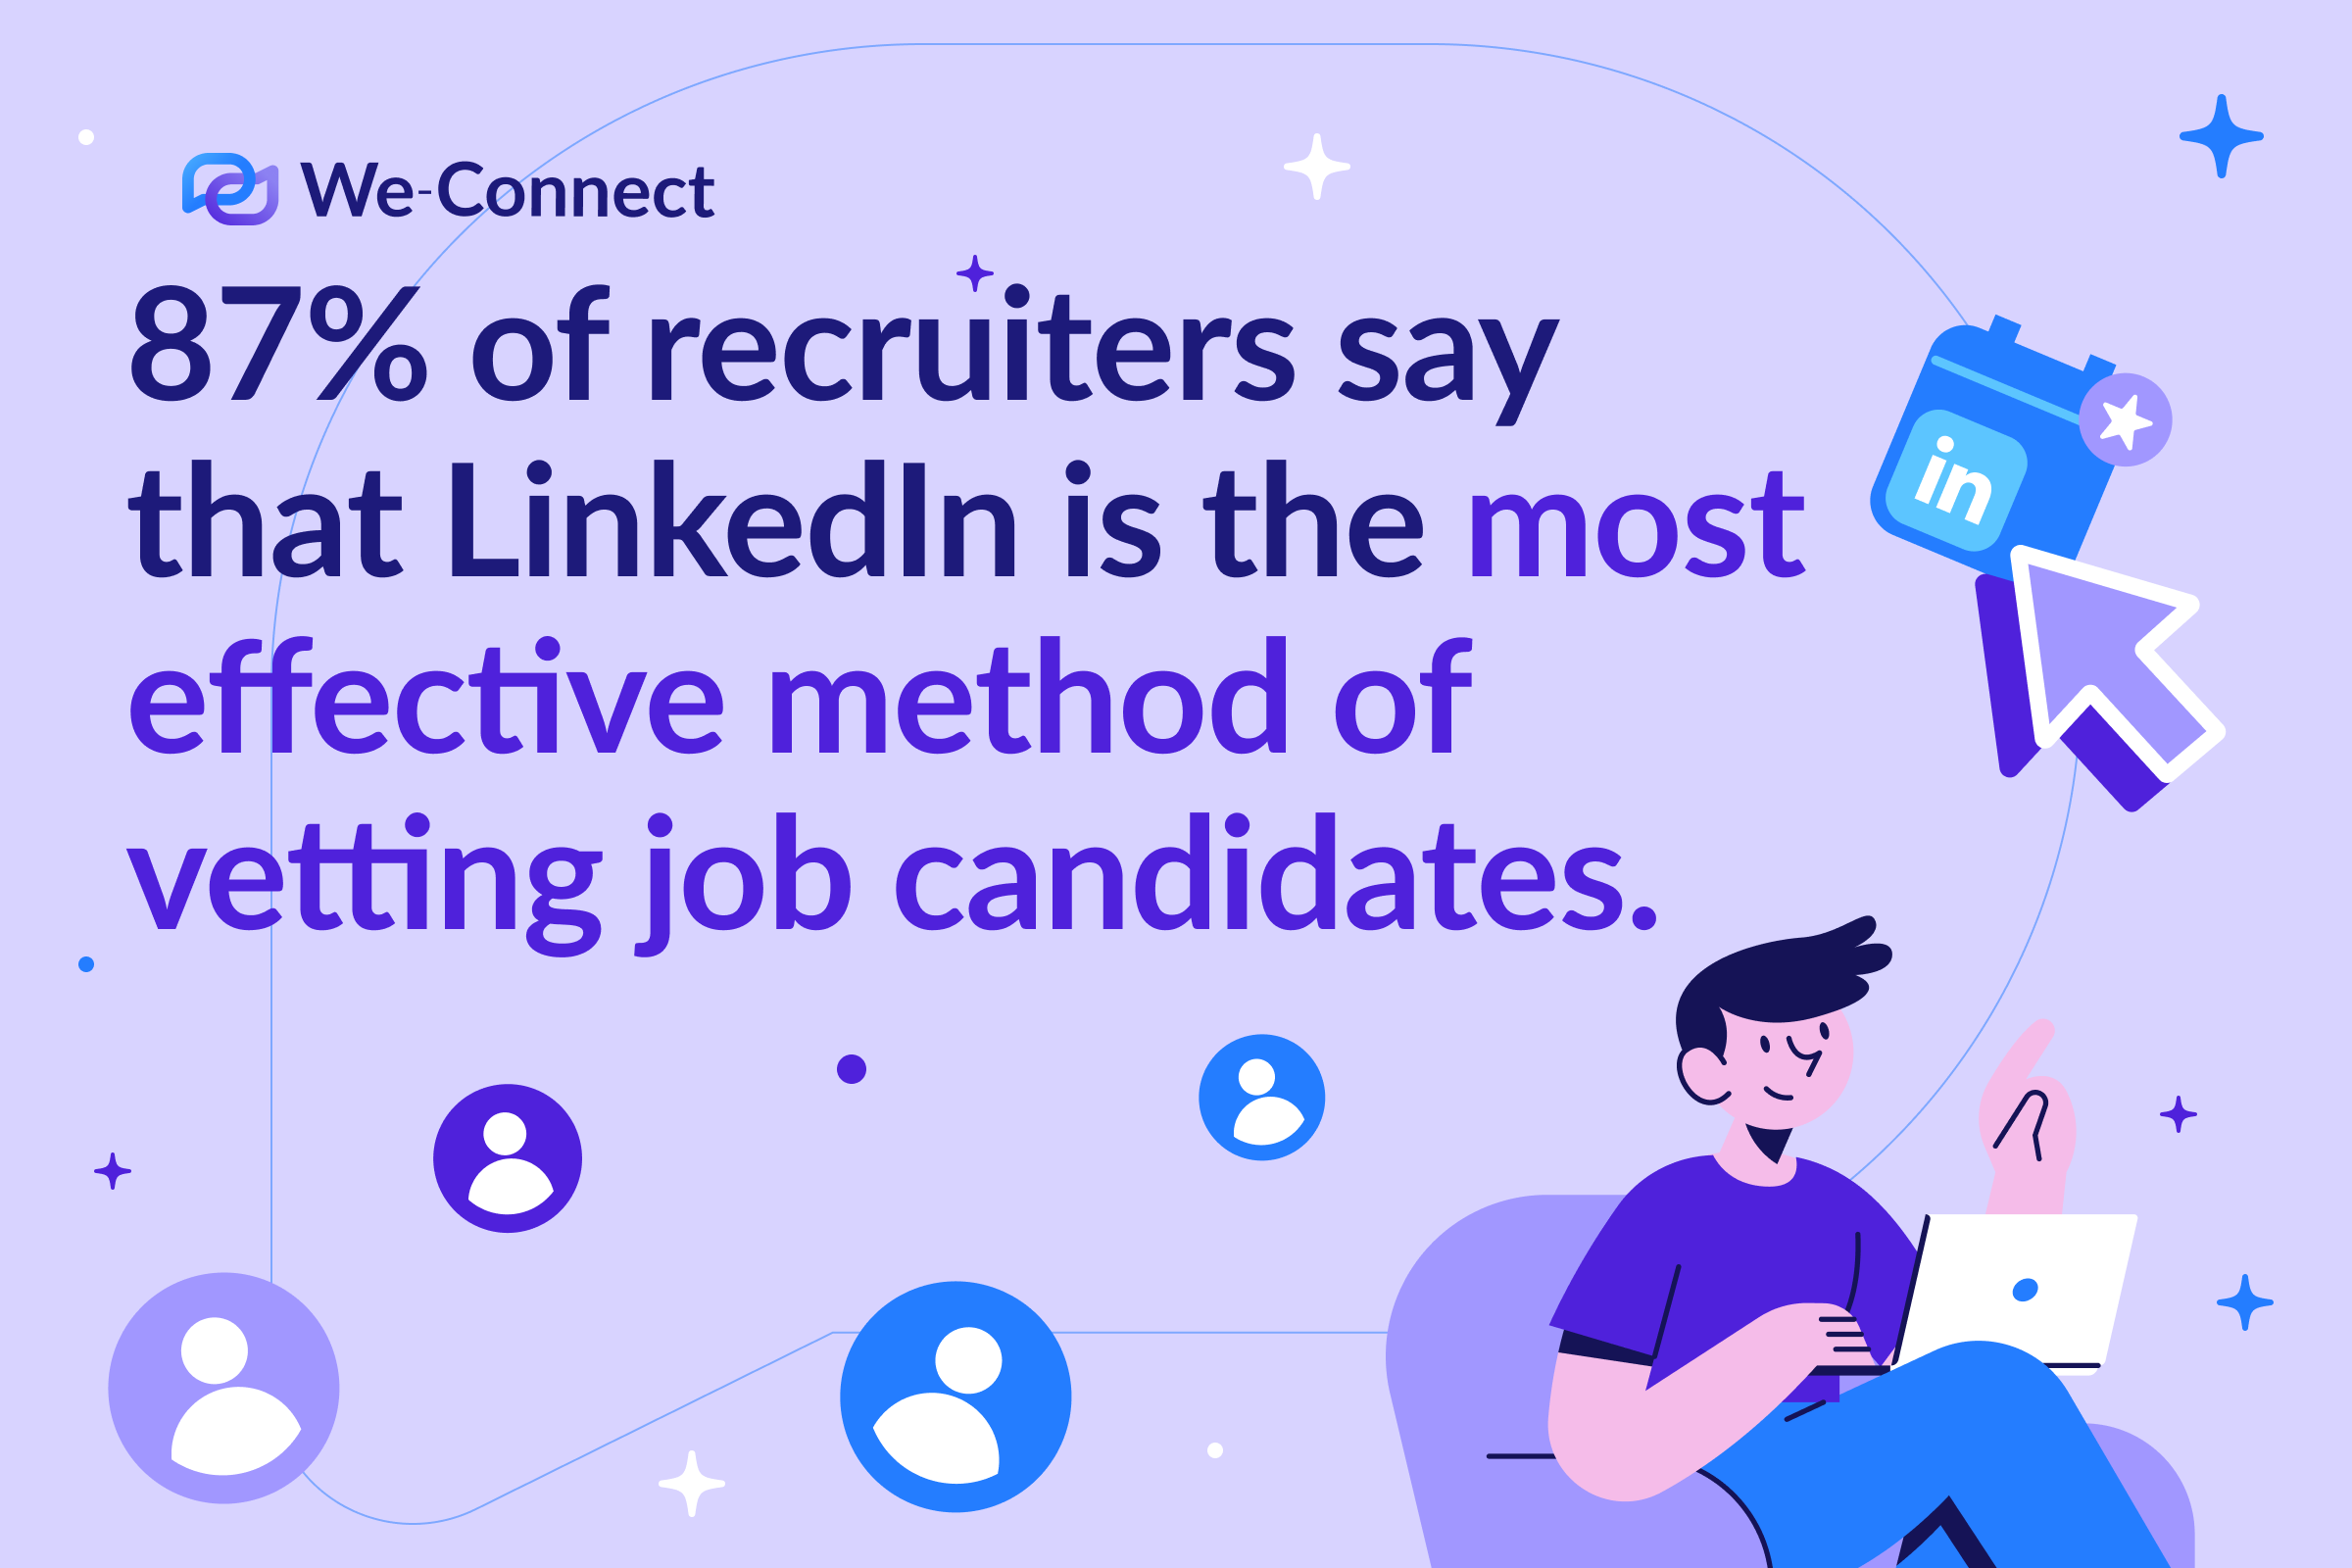 87% of recruiters say that LinkedIn is the most effective method of vetting job candidates.